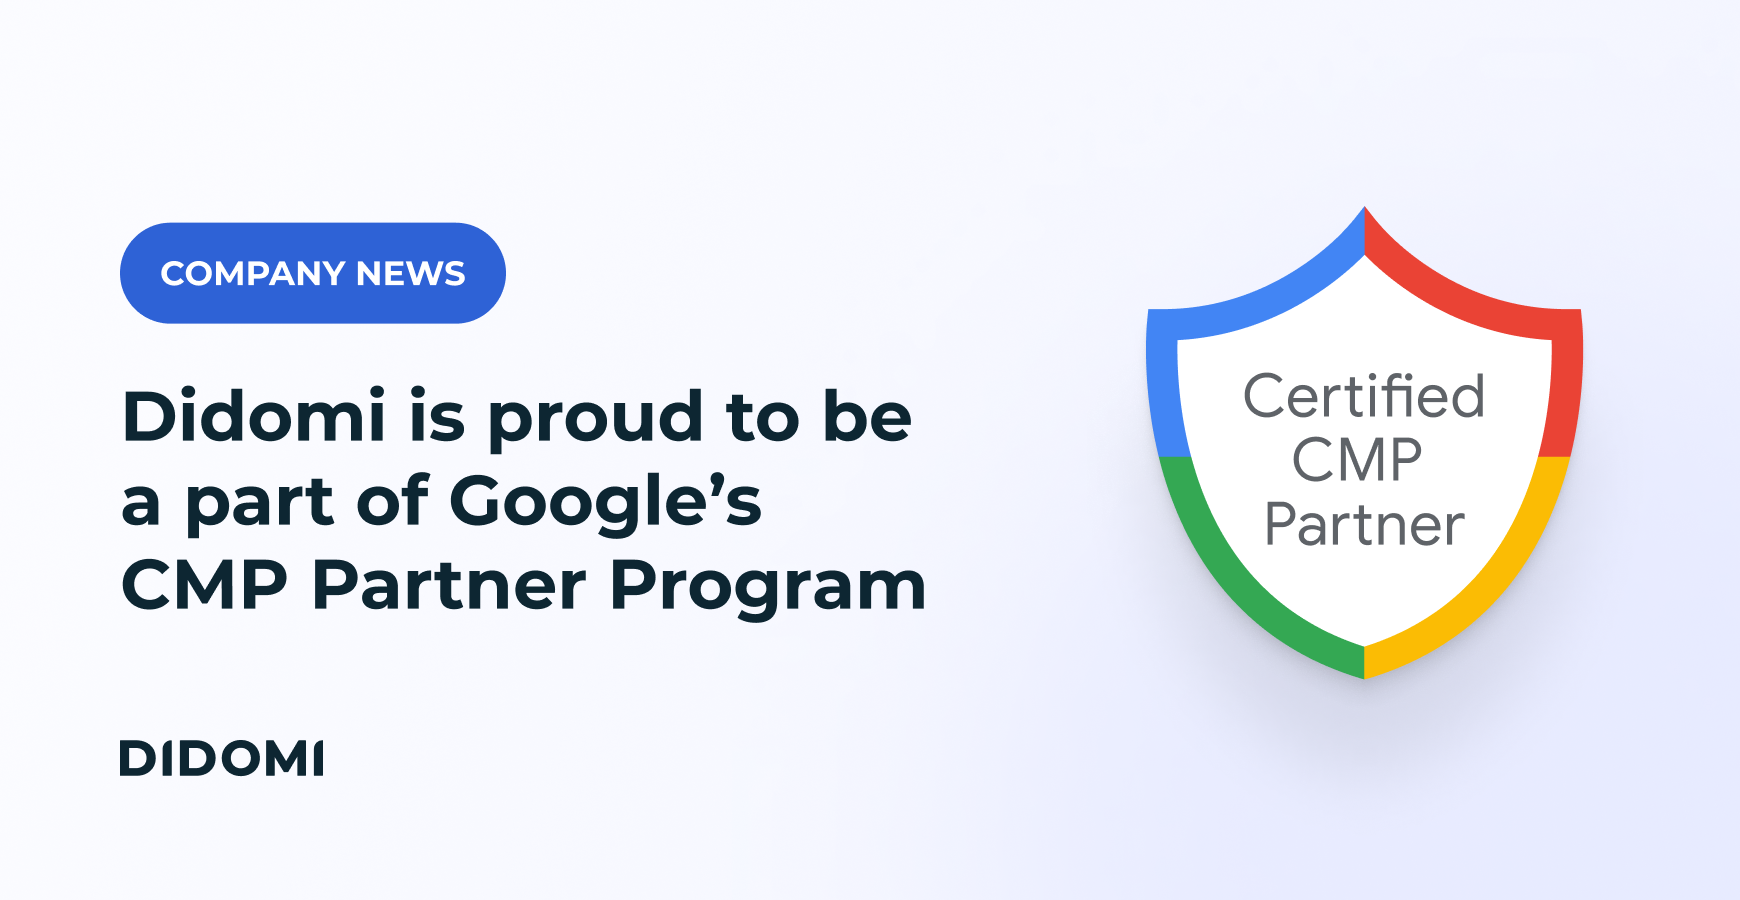 Didomi is proud to be a part of Google’s CMP Partner Program